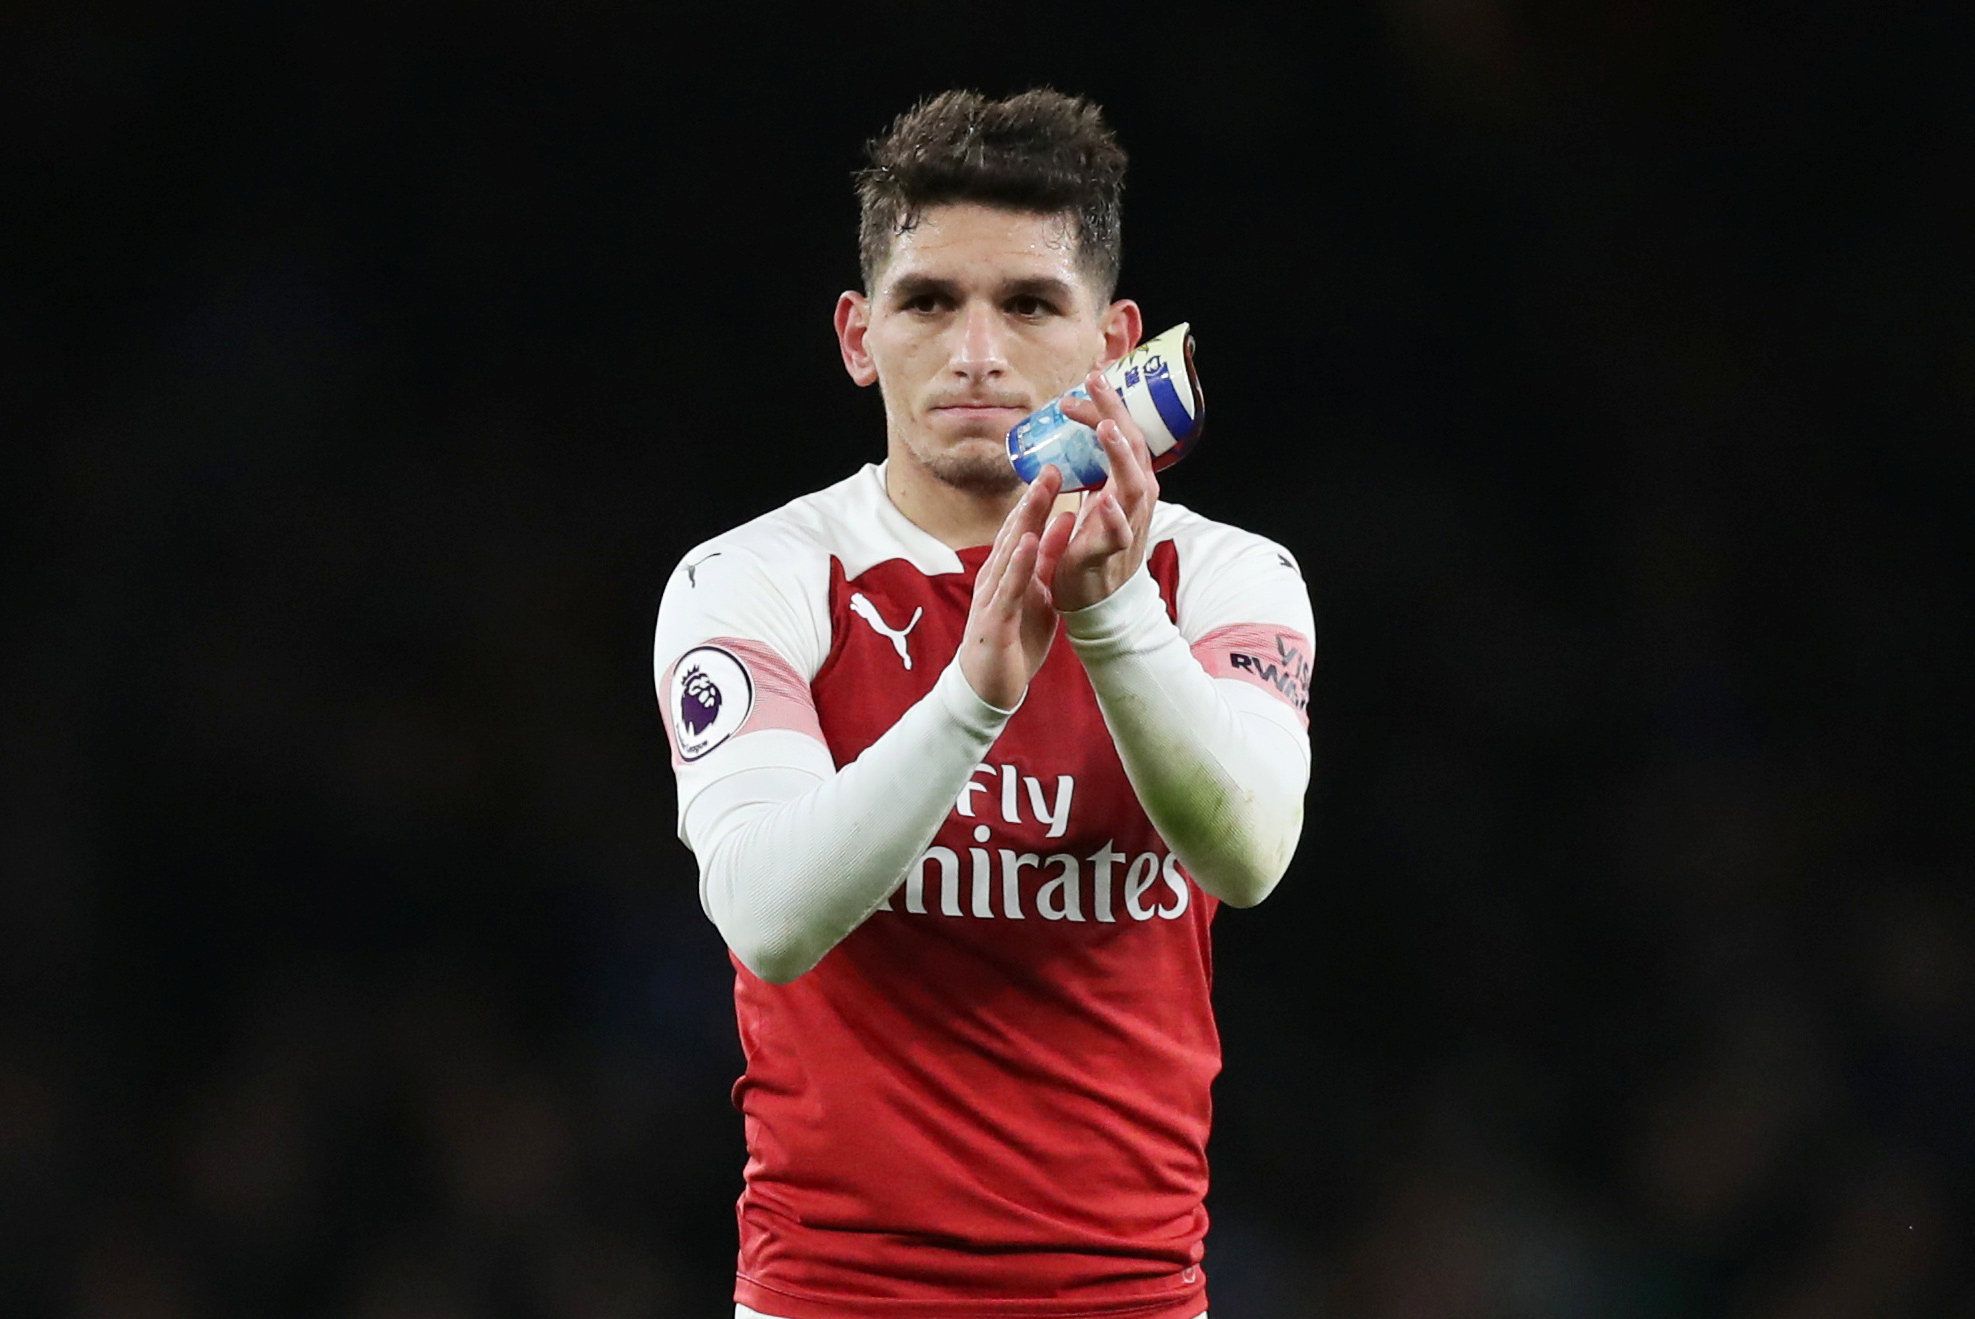 Soccer Football - Premier League - Arsenal v Huddersfield Town - Emirates Stadium, London, Britain - December 8, 2018  Arsenal's Lucas Torreira applauds the fans at the end of the match   Action Images via Reuters/Peter Cziborra  EDITORIAL USE ONLY. No use with unauthorized audio, video, data, fixture lists, club/league logos or 